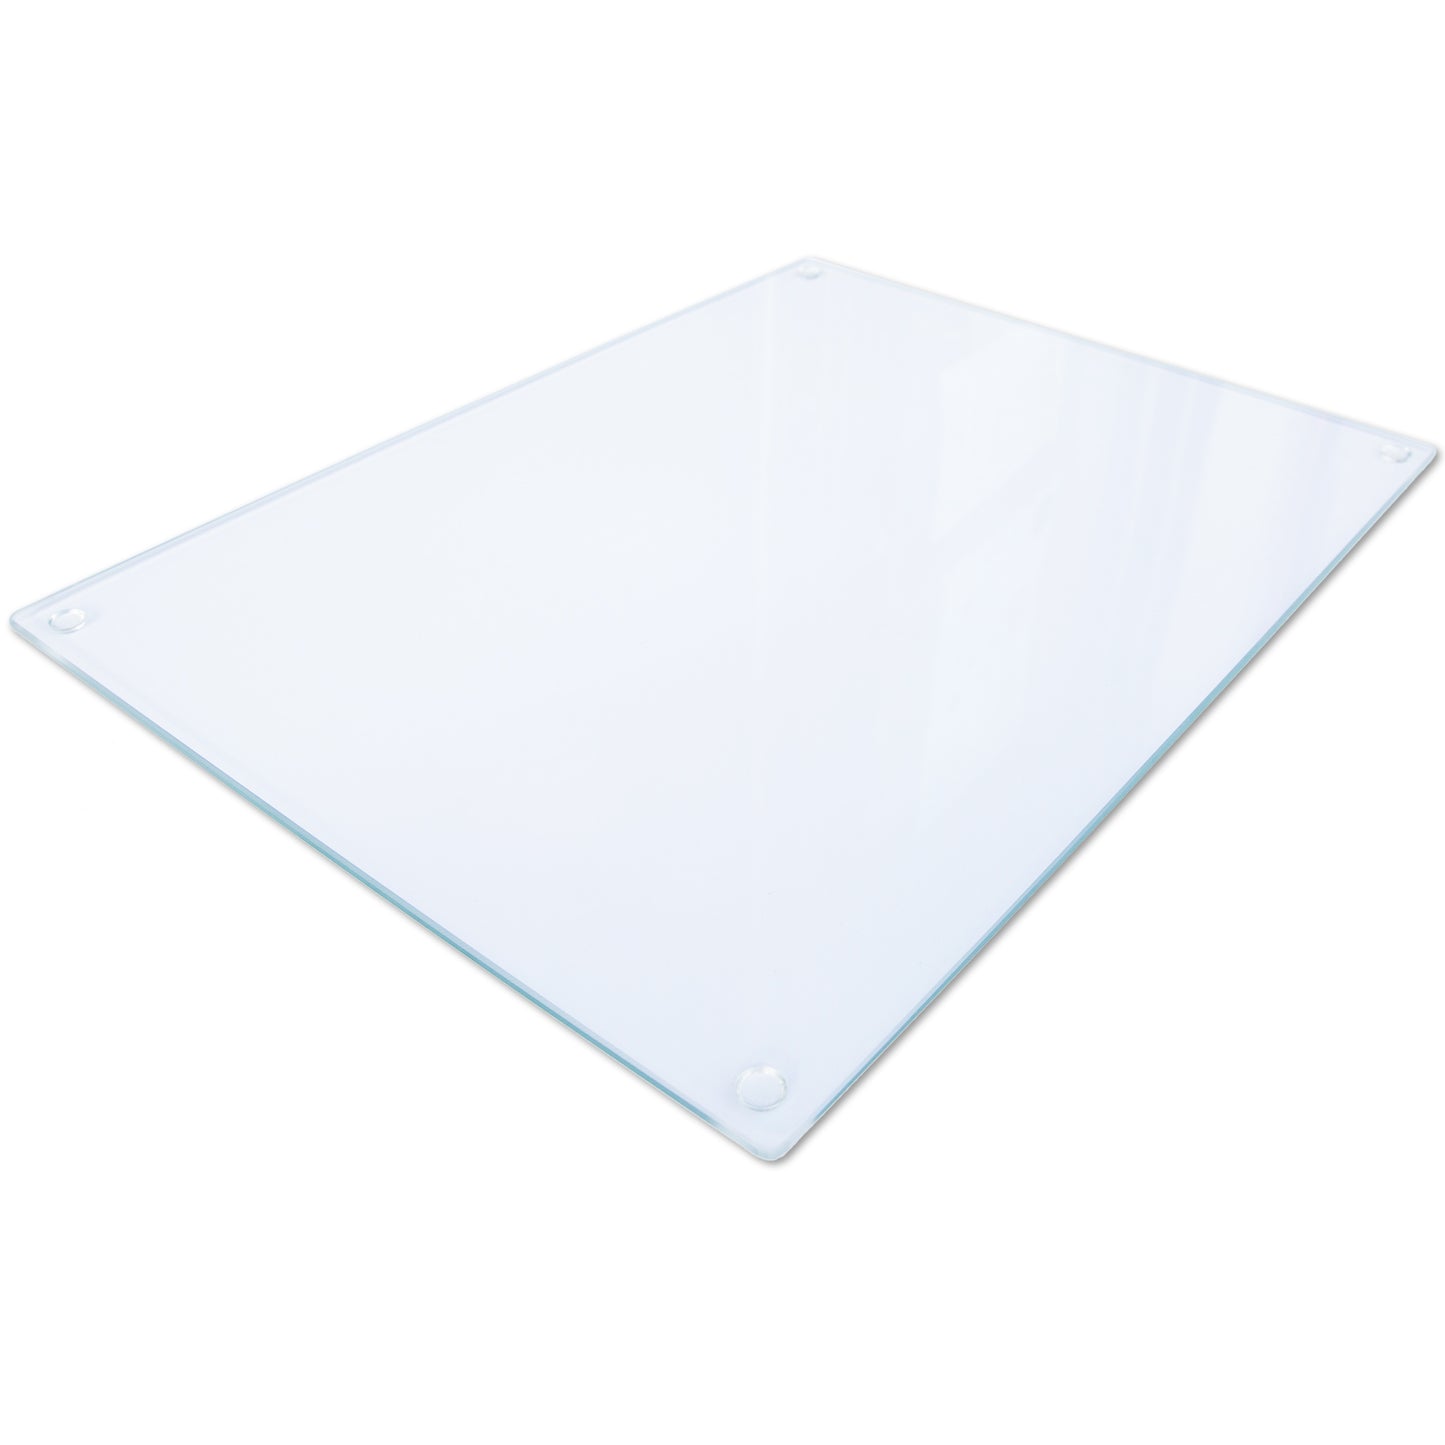 Glass Chopping Board For Kitchen Worktop Saver Clear Design